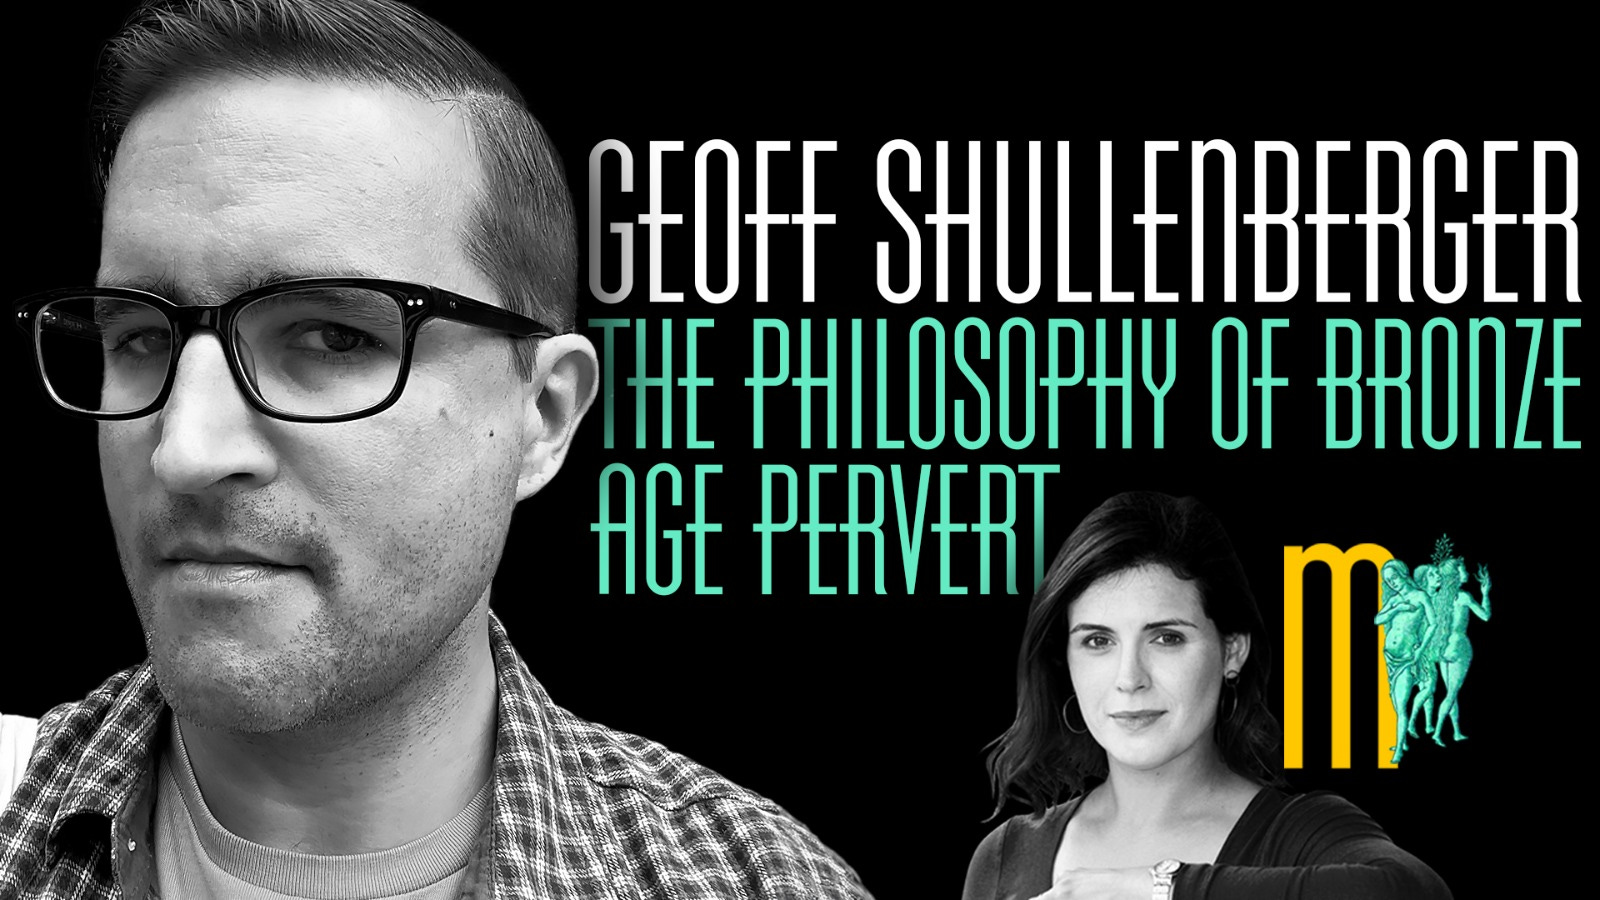 The Philosophy of Bronze Age Pervert - Geoff Shullenberger | Maiden Mother Matriarch 35